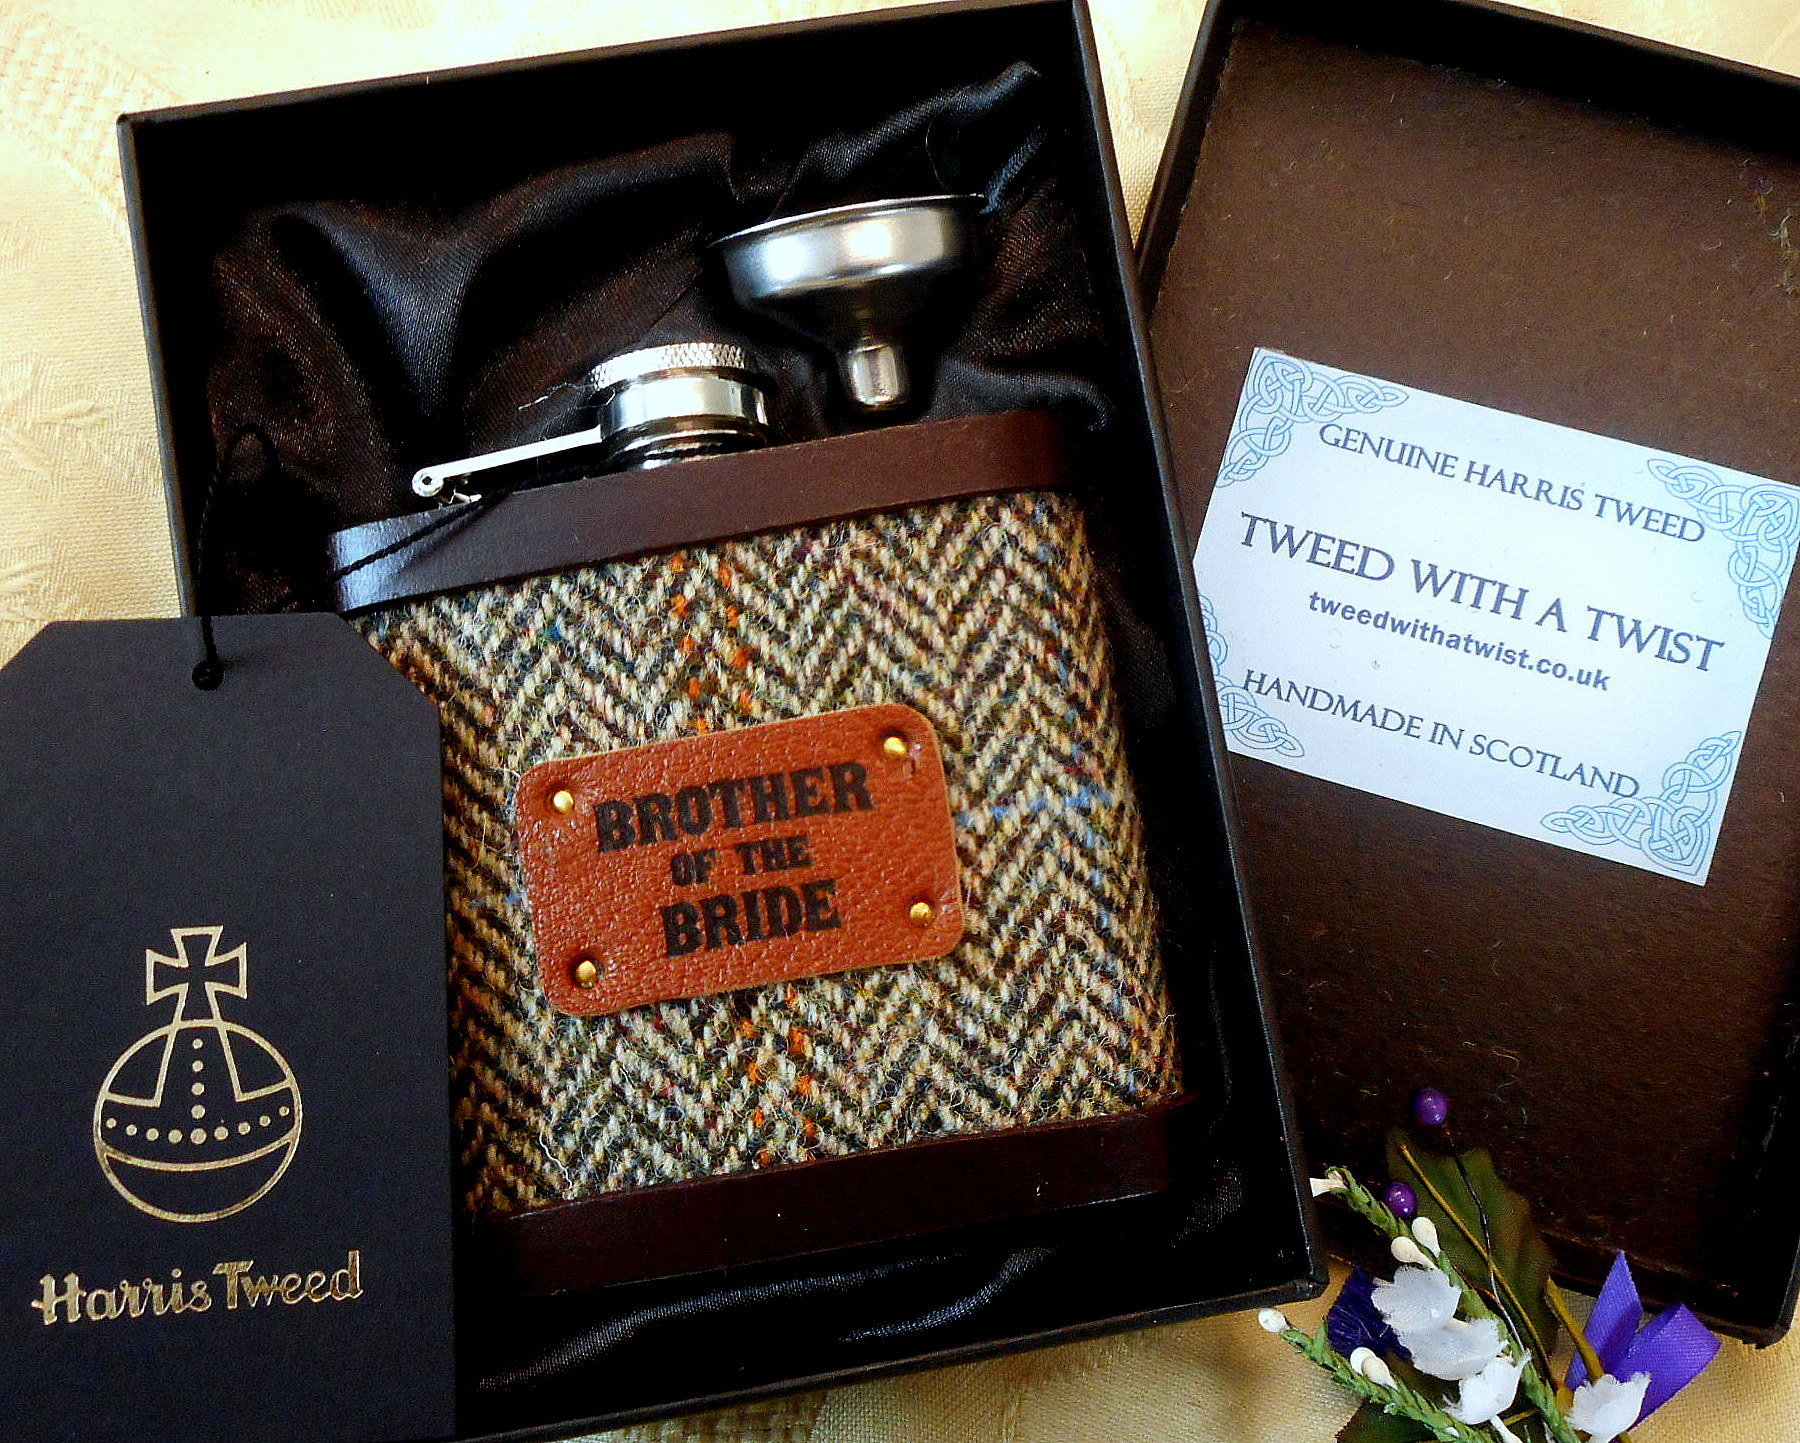 Brother-of-the-bride-gift-in-presentation-box-Tweed-with -a-twist-of-Scotland